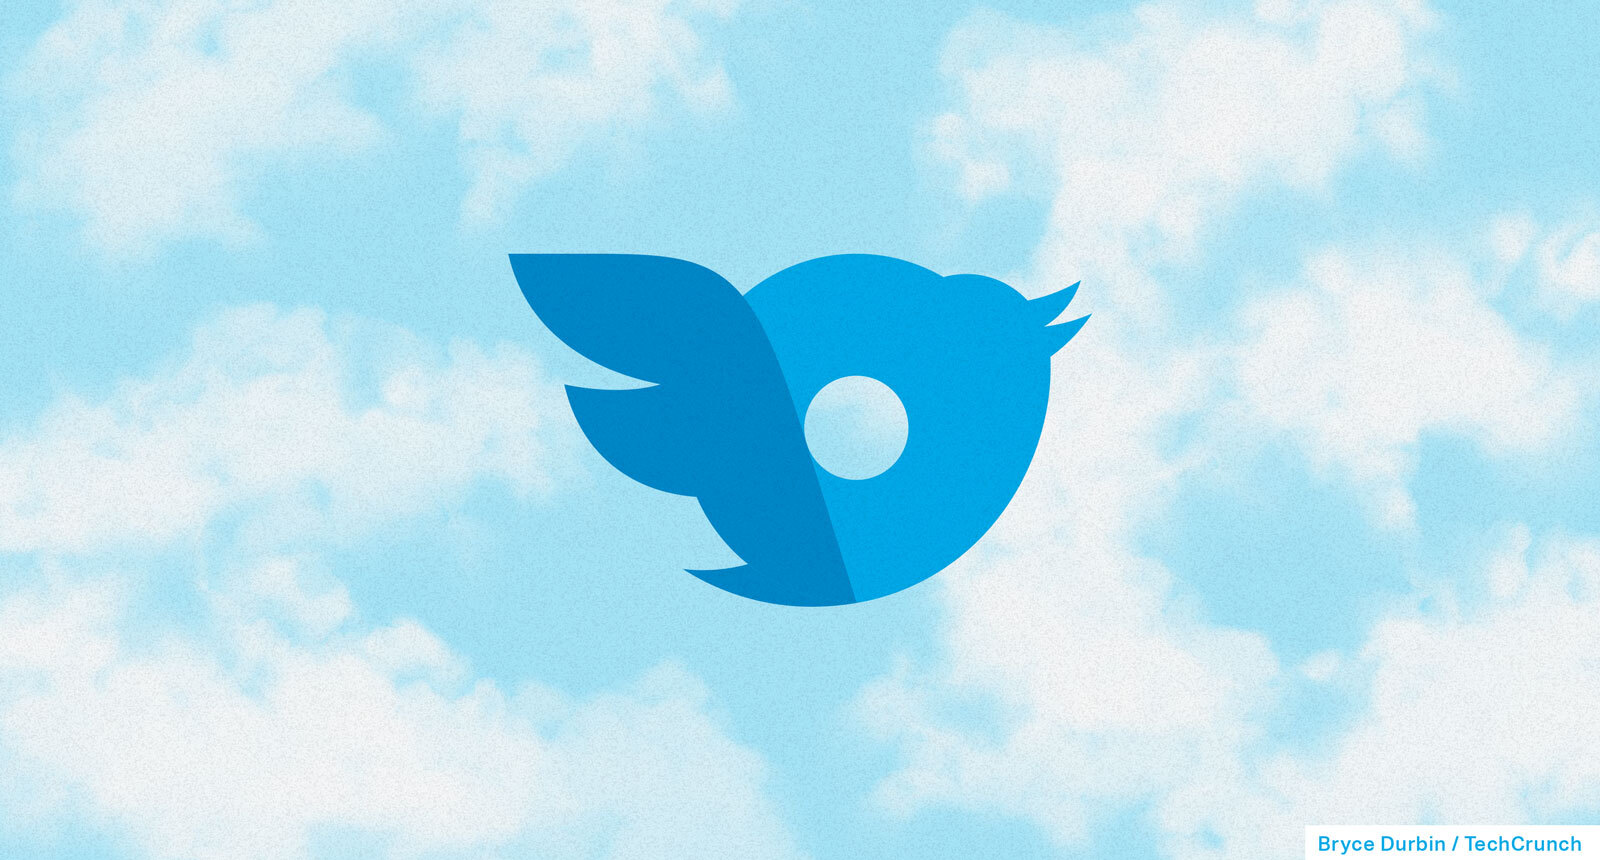 twitter and onlyfans logos mashed up on a cloudy background